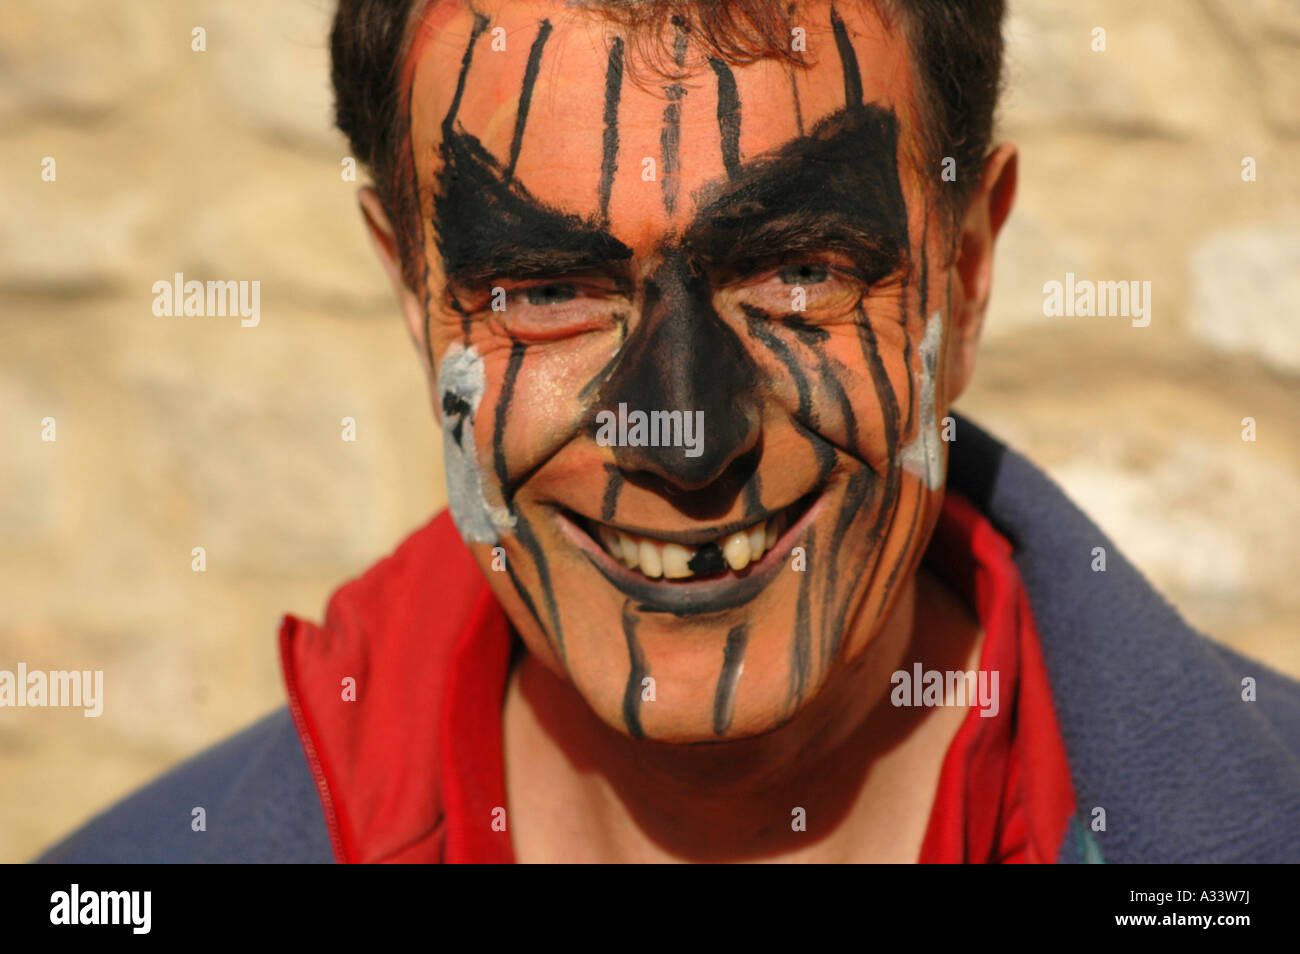 Man with face painted to look like pumkin Stock Photo